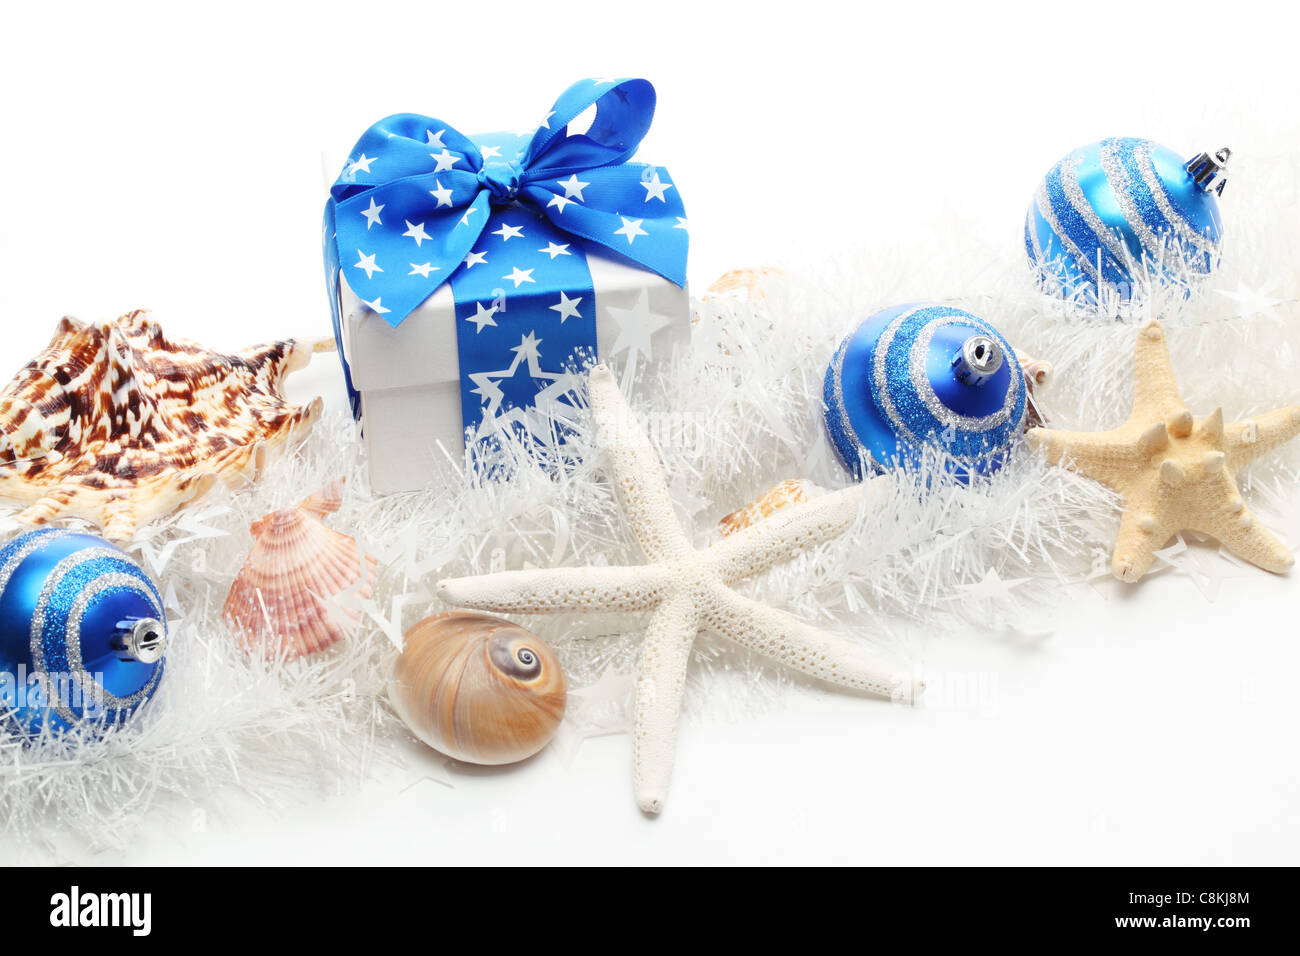 Christmas decorations and gifts Stock Photo